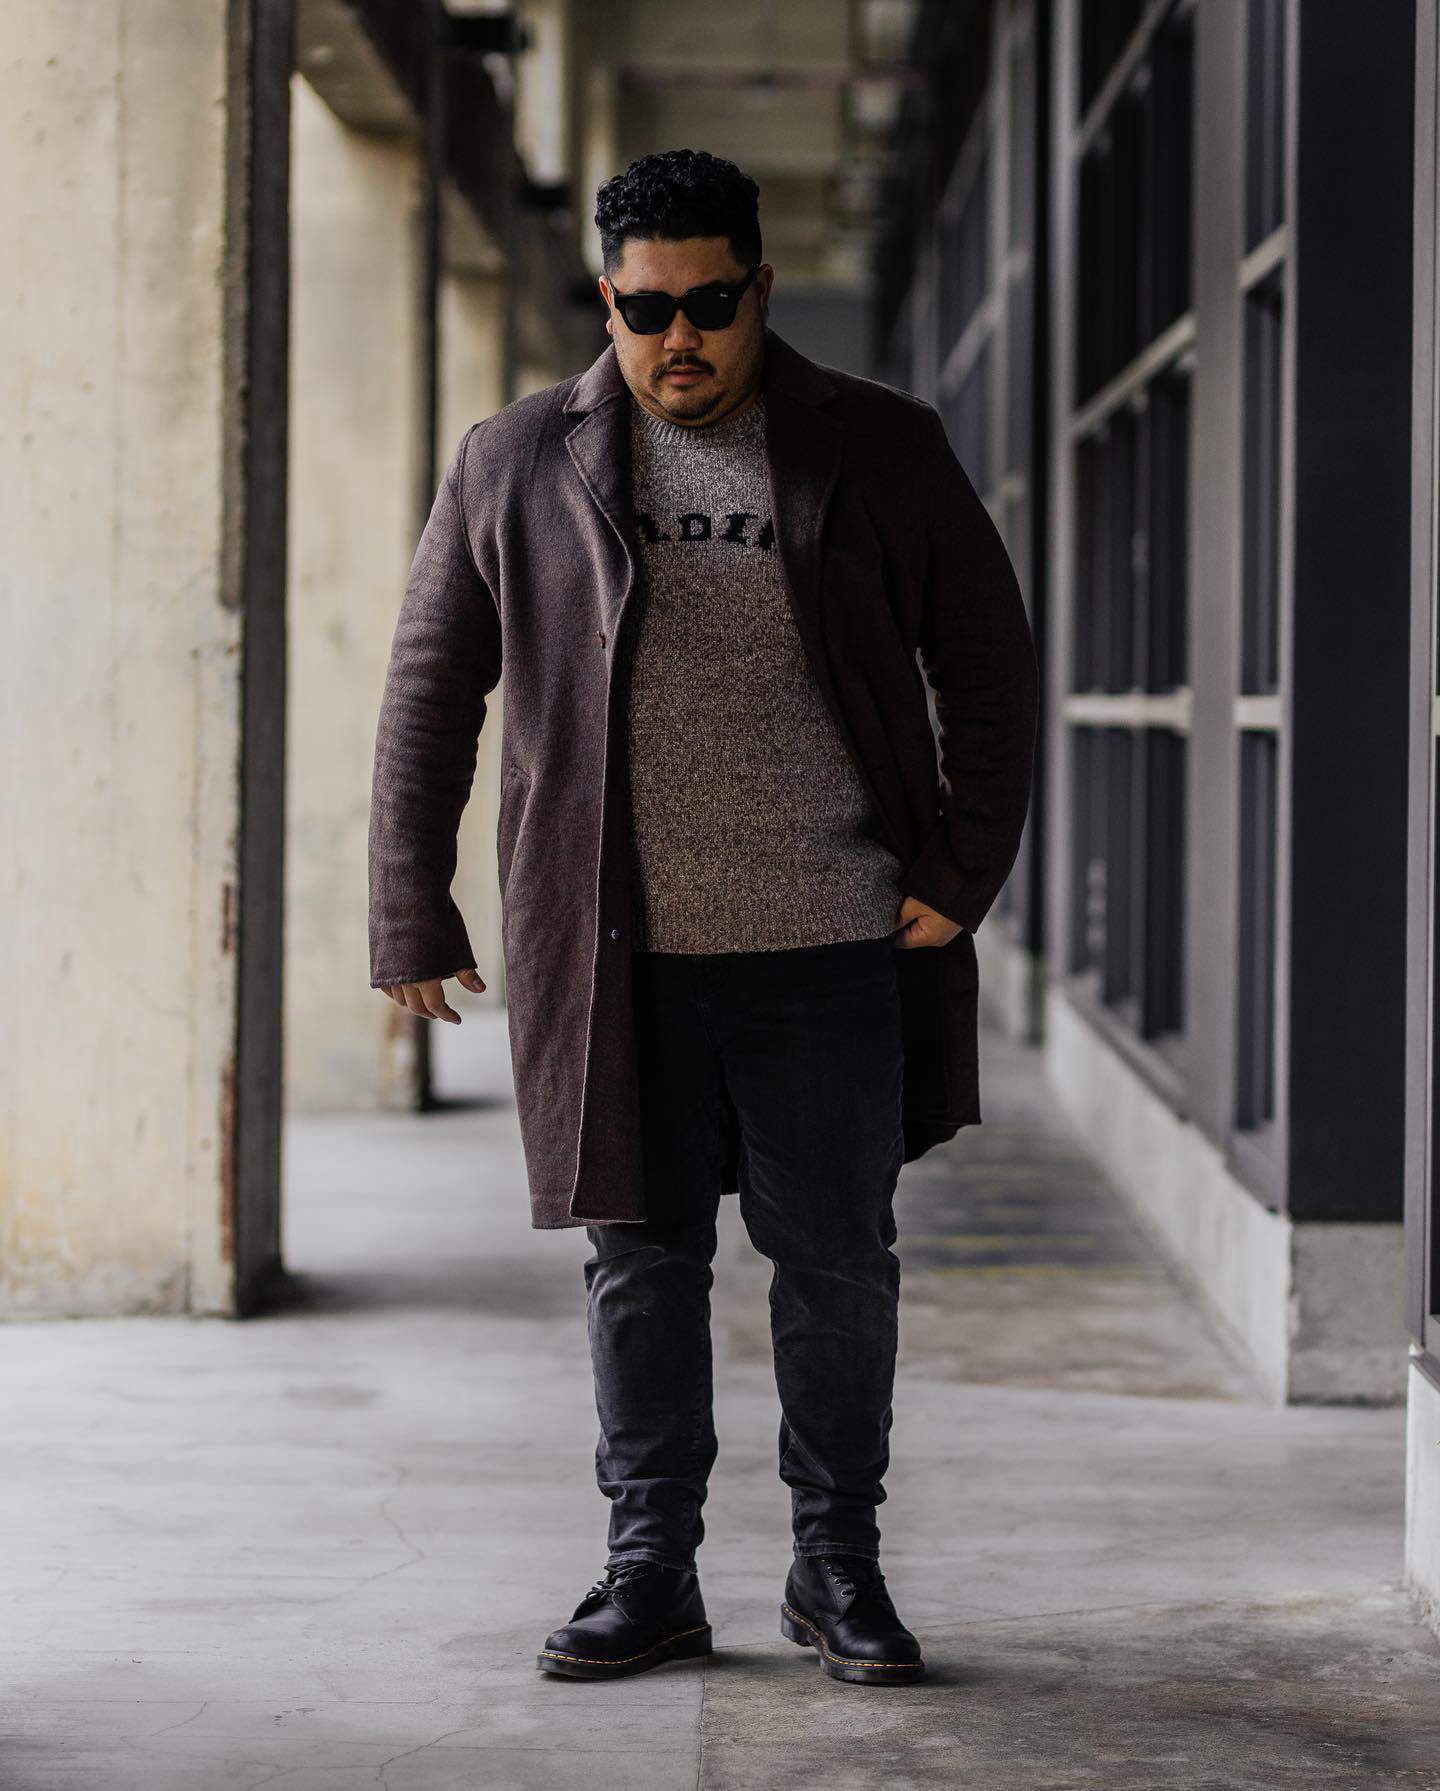 Nick Urteaga - Light coats and knits, a perfect combo for this LA Winter compliments of #forever21me